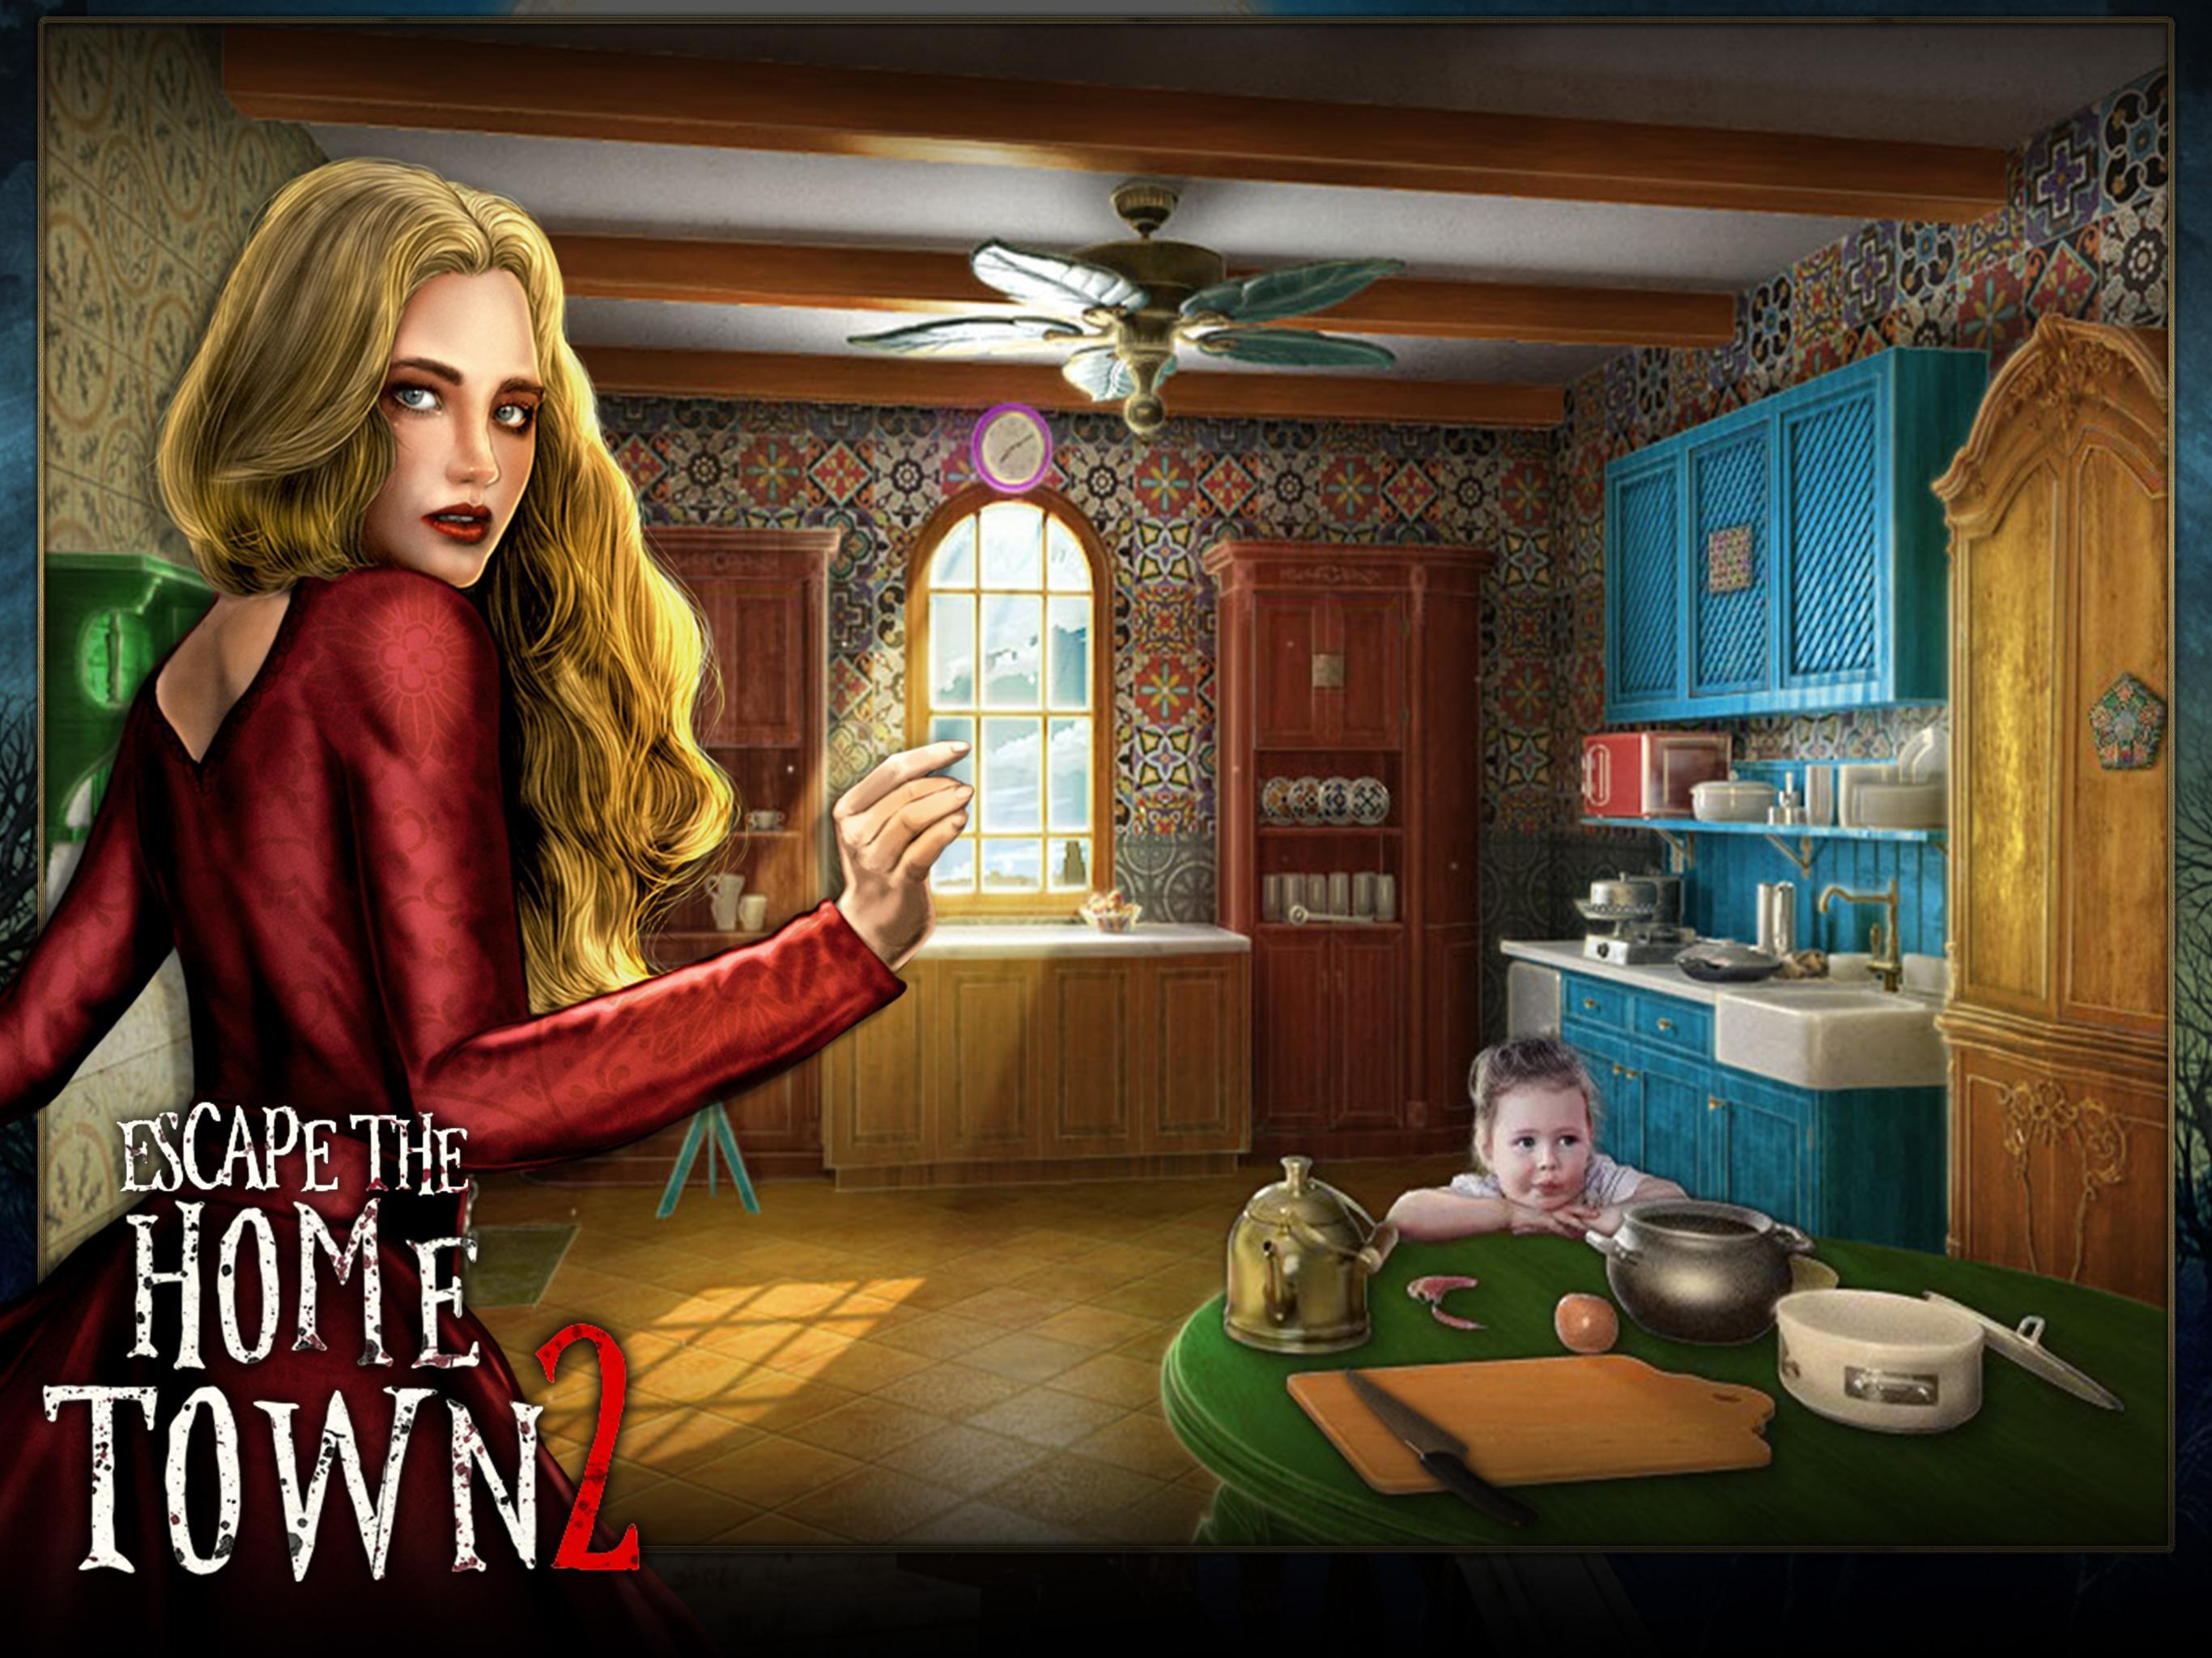 Adventure town 2. Игра Home Town. Home Escape игра. Escape game Home Town. Прохождение игры Escape game Home Town.